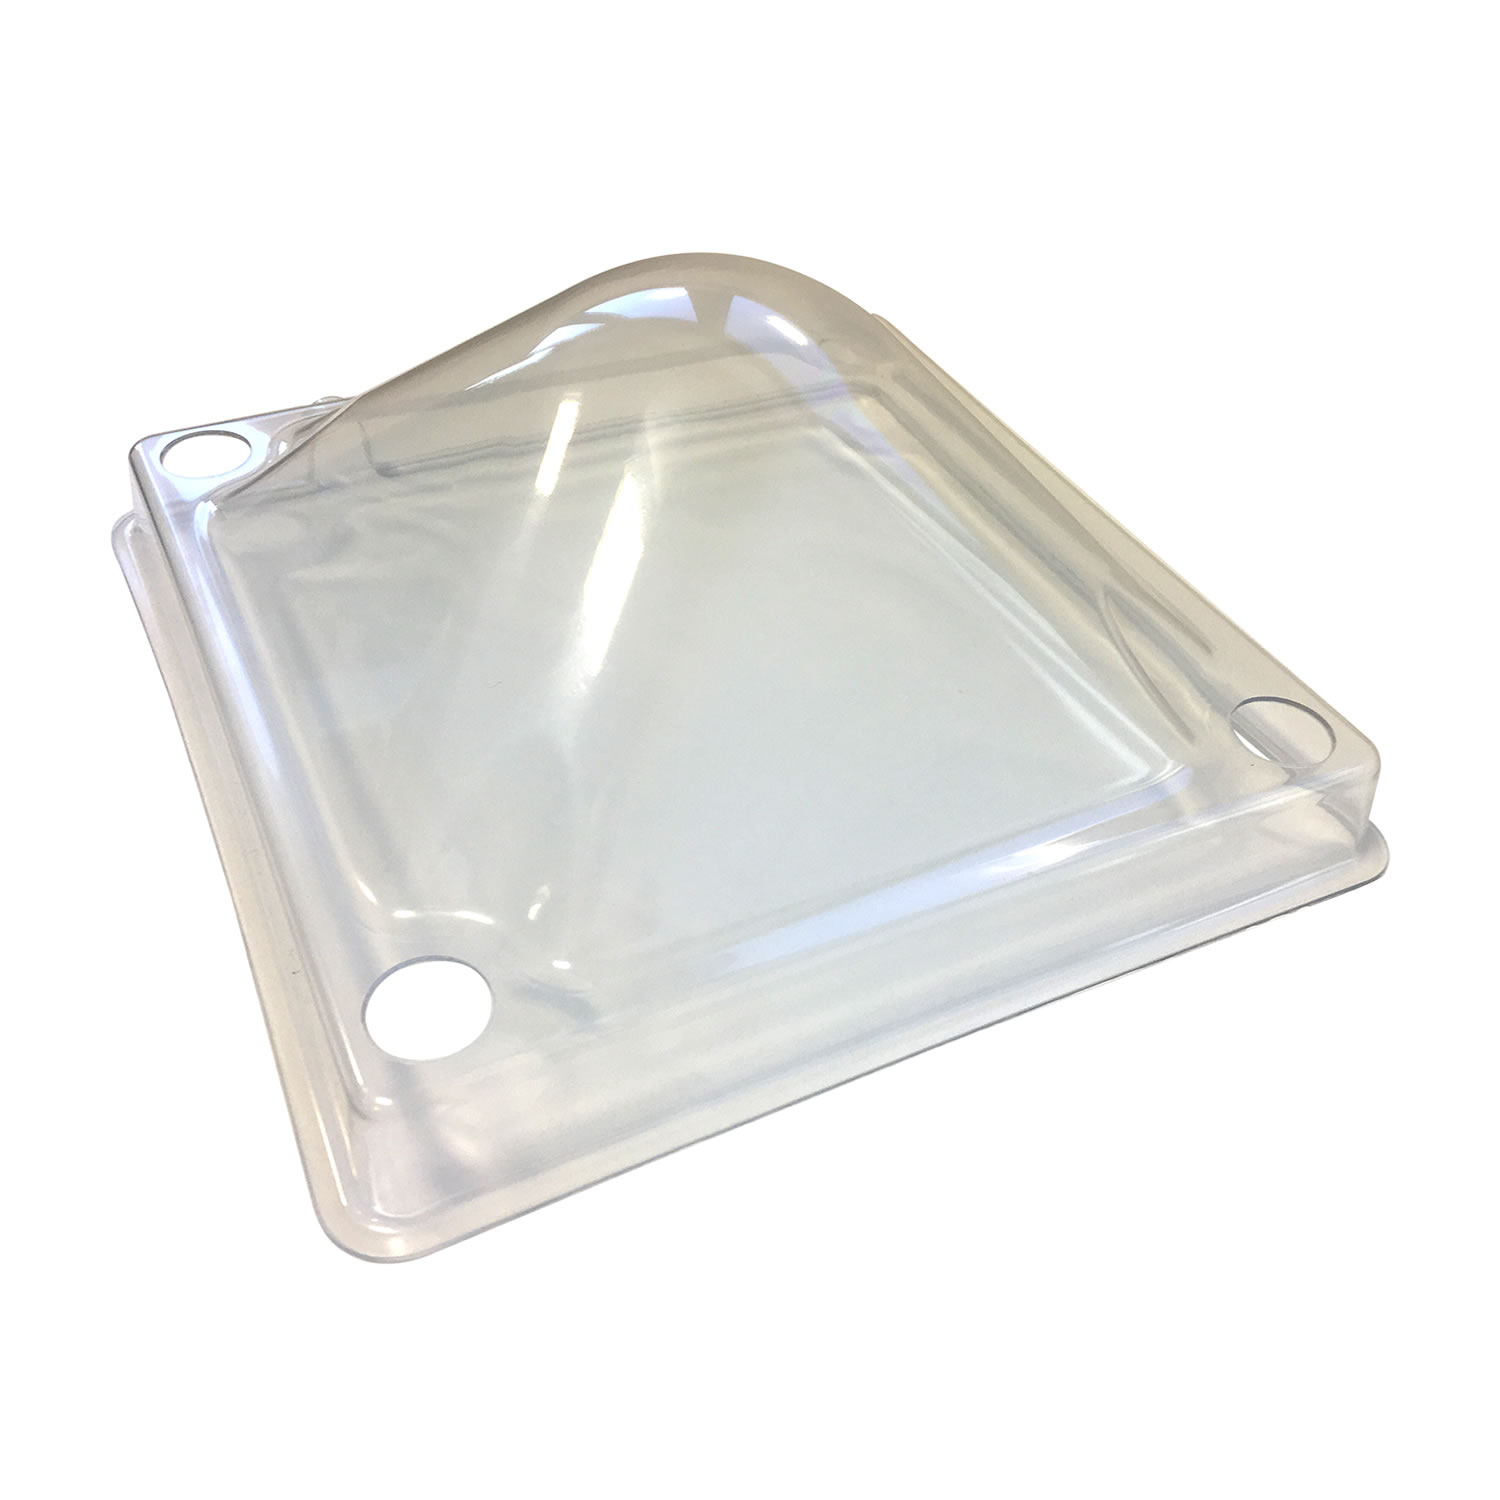 CHICKTEC COMFORT CLEAR PLASTIC DOME COVER 30 CM  CLEAR